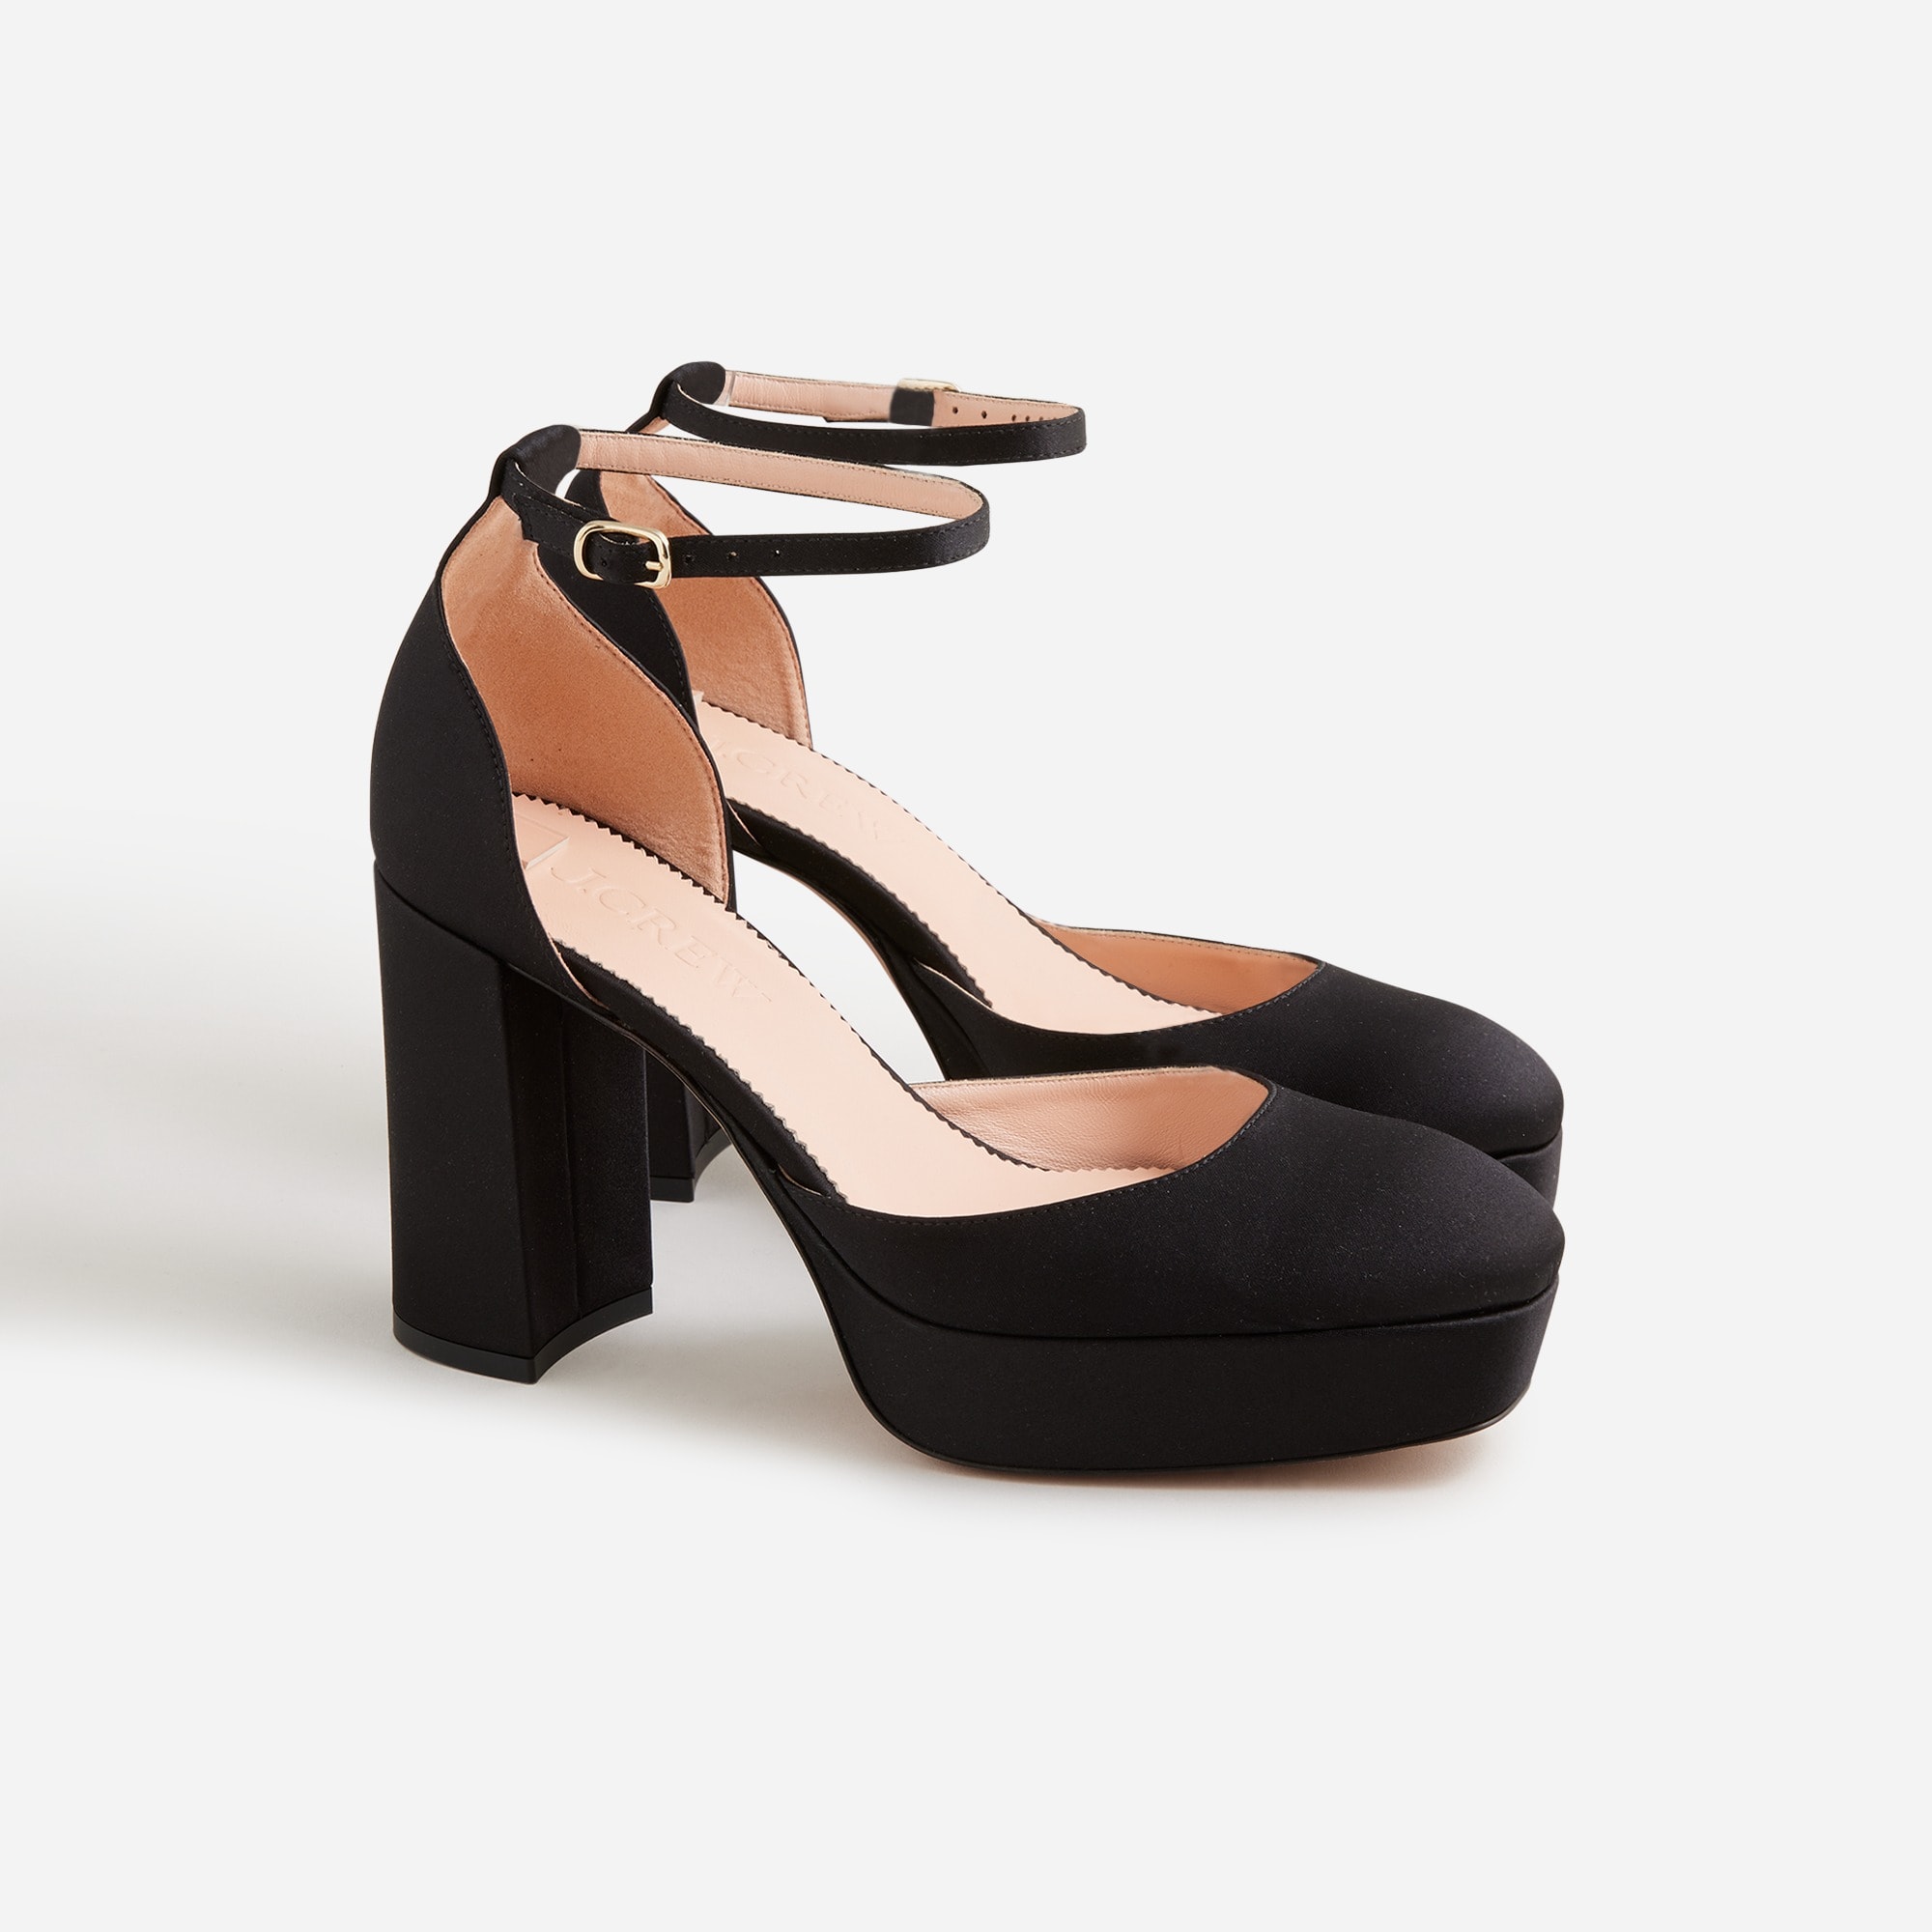  Collection Maisie made-in-Italy platform heels